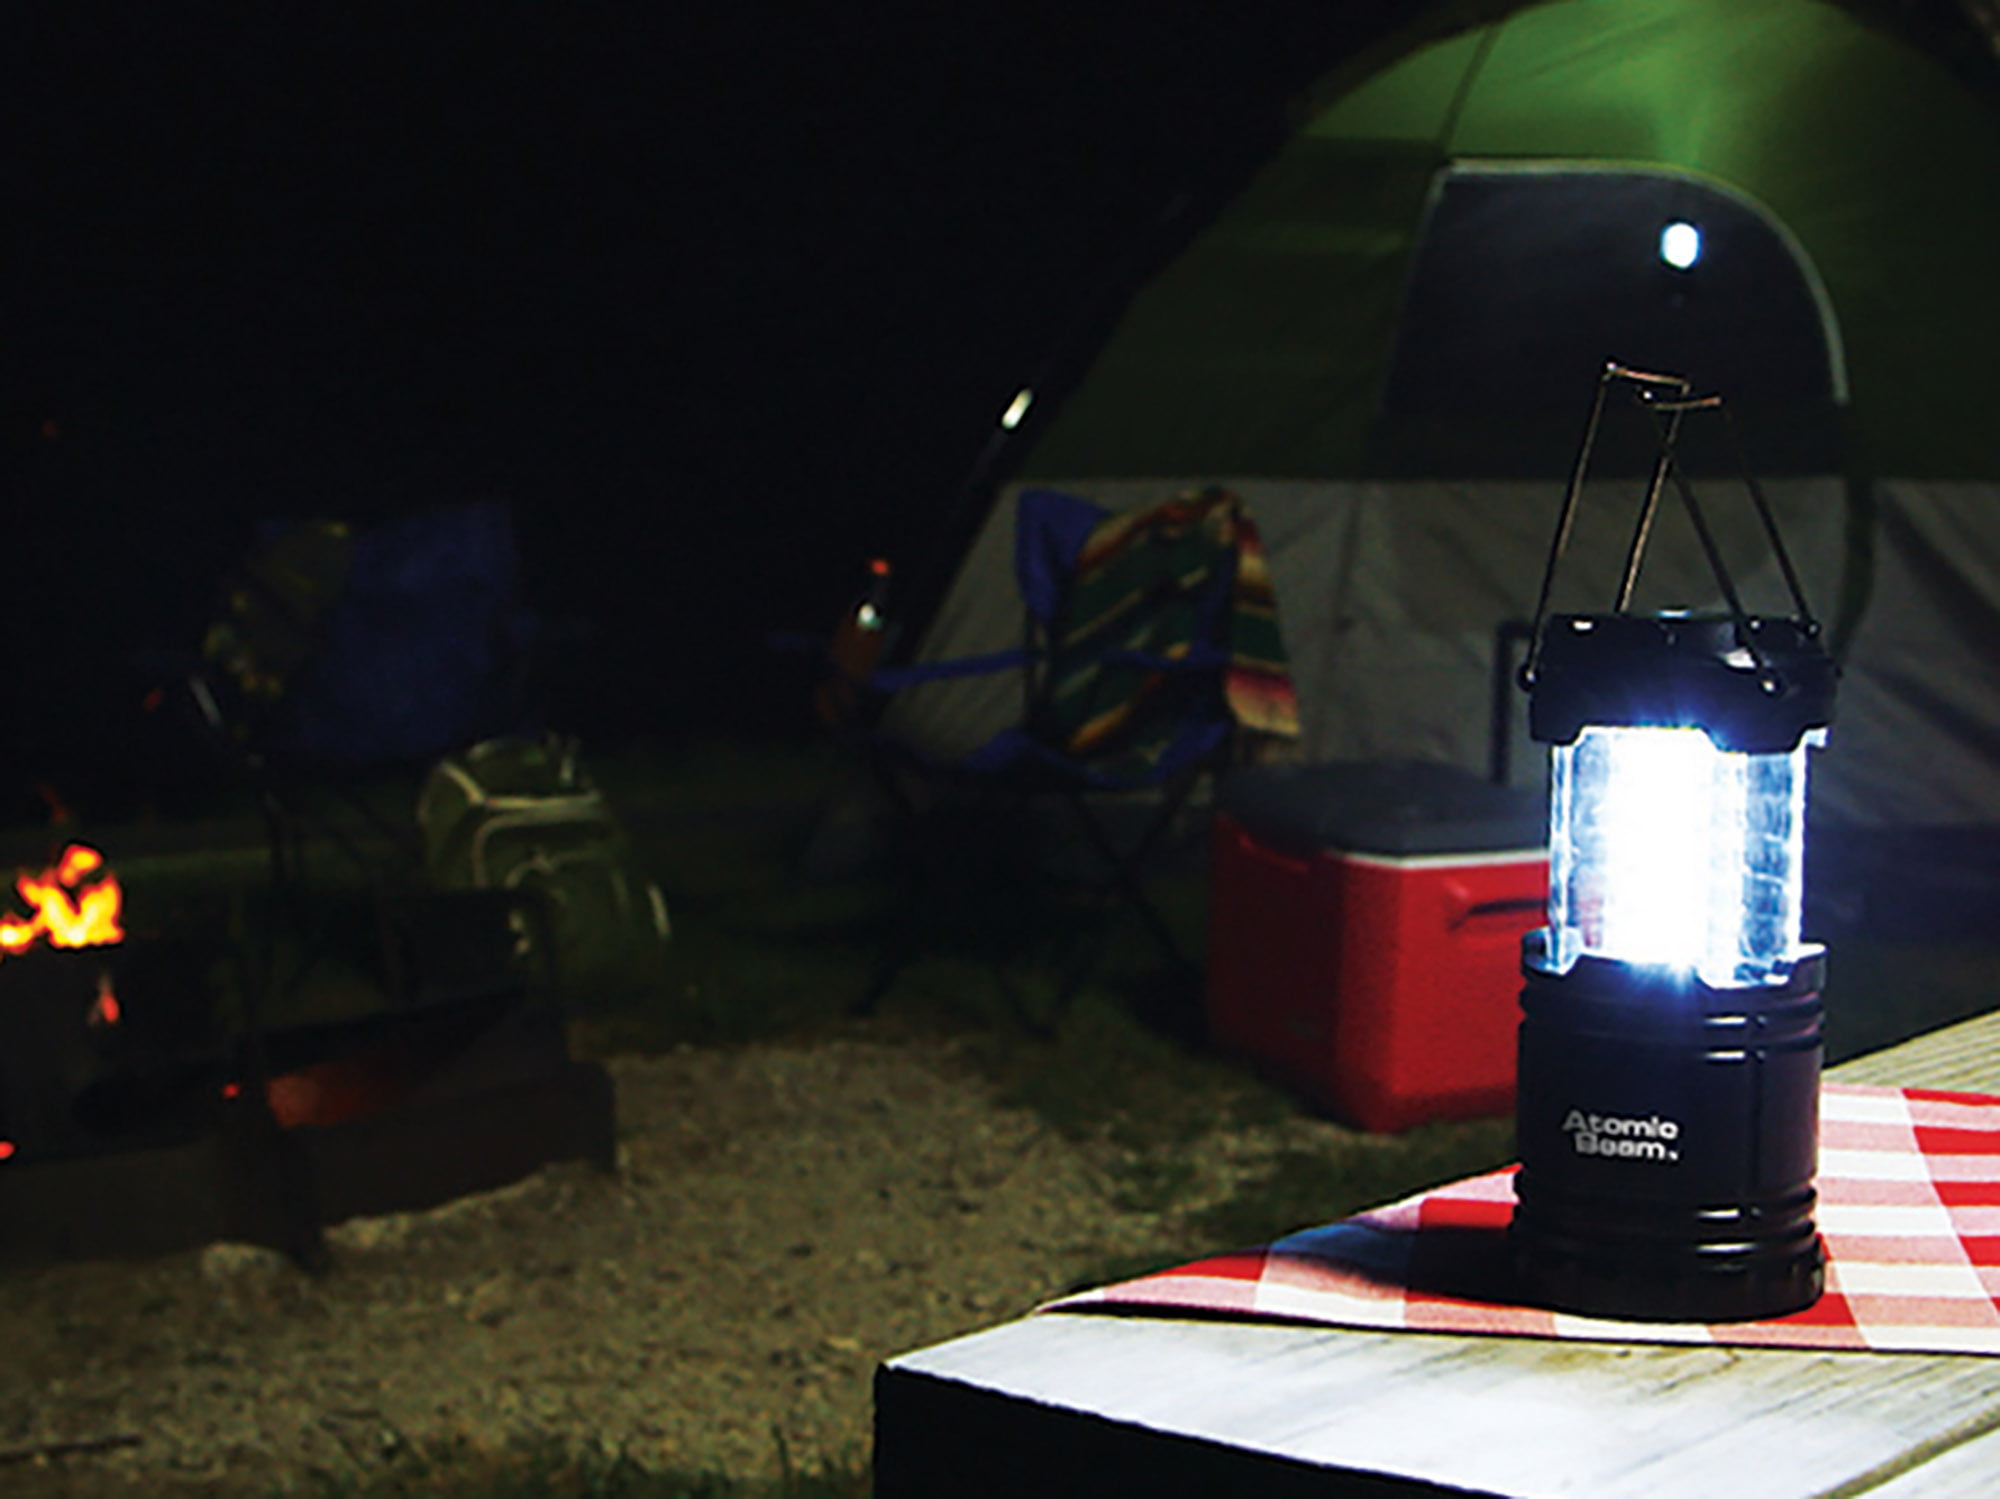 Atomic Beam Lantern Original by Bulbhead, Bright 360-Degree, Collapsible  LED Lantern for Emergencies & Camping 